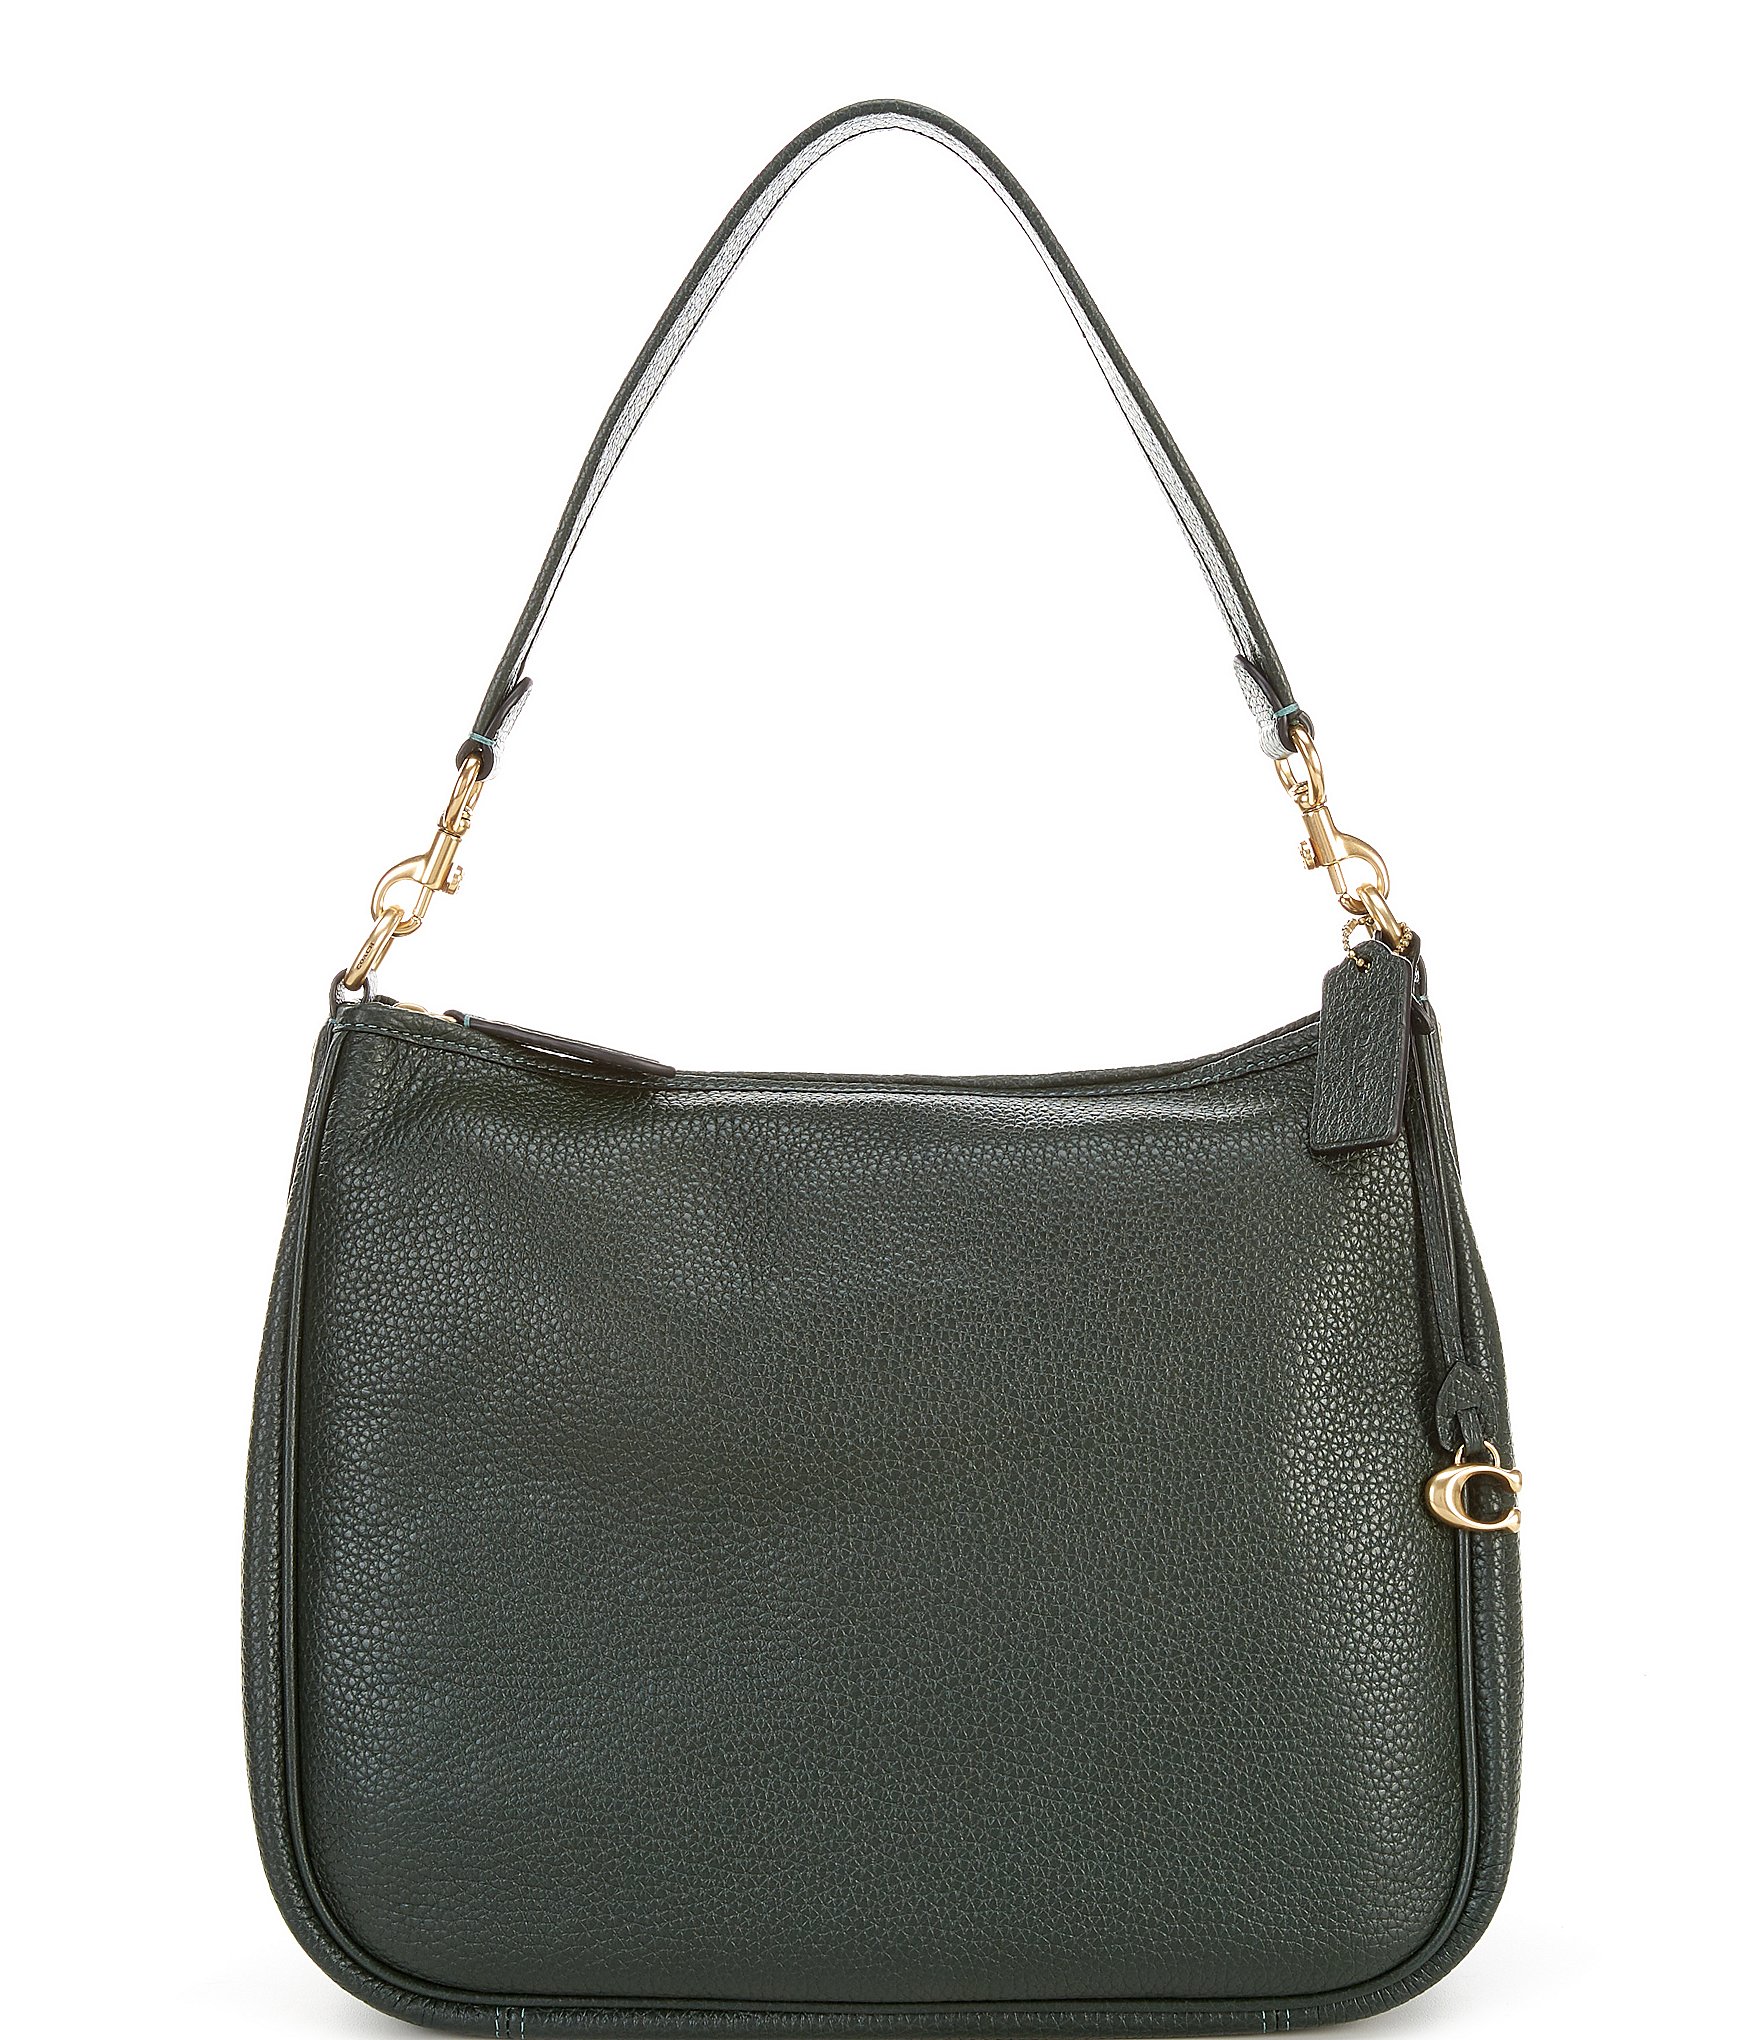 COACH Cary Pebbled Leather Shoulder Bag | Dillard's